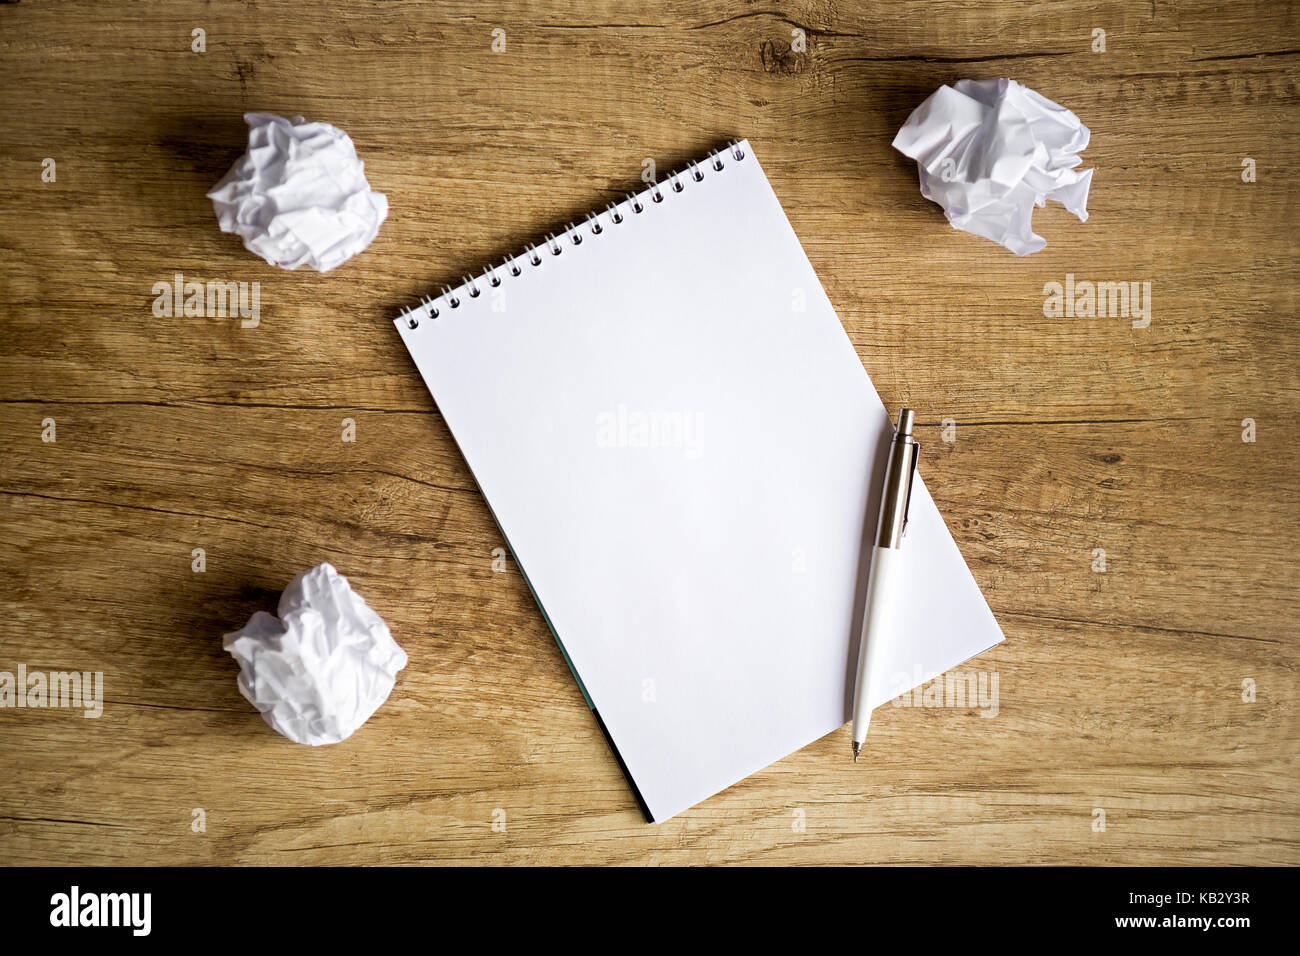 concept - no idea , Empty notebook on wooden table with crumpled papers around Stock Photo